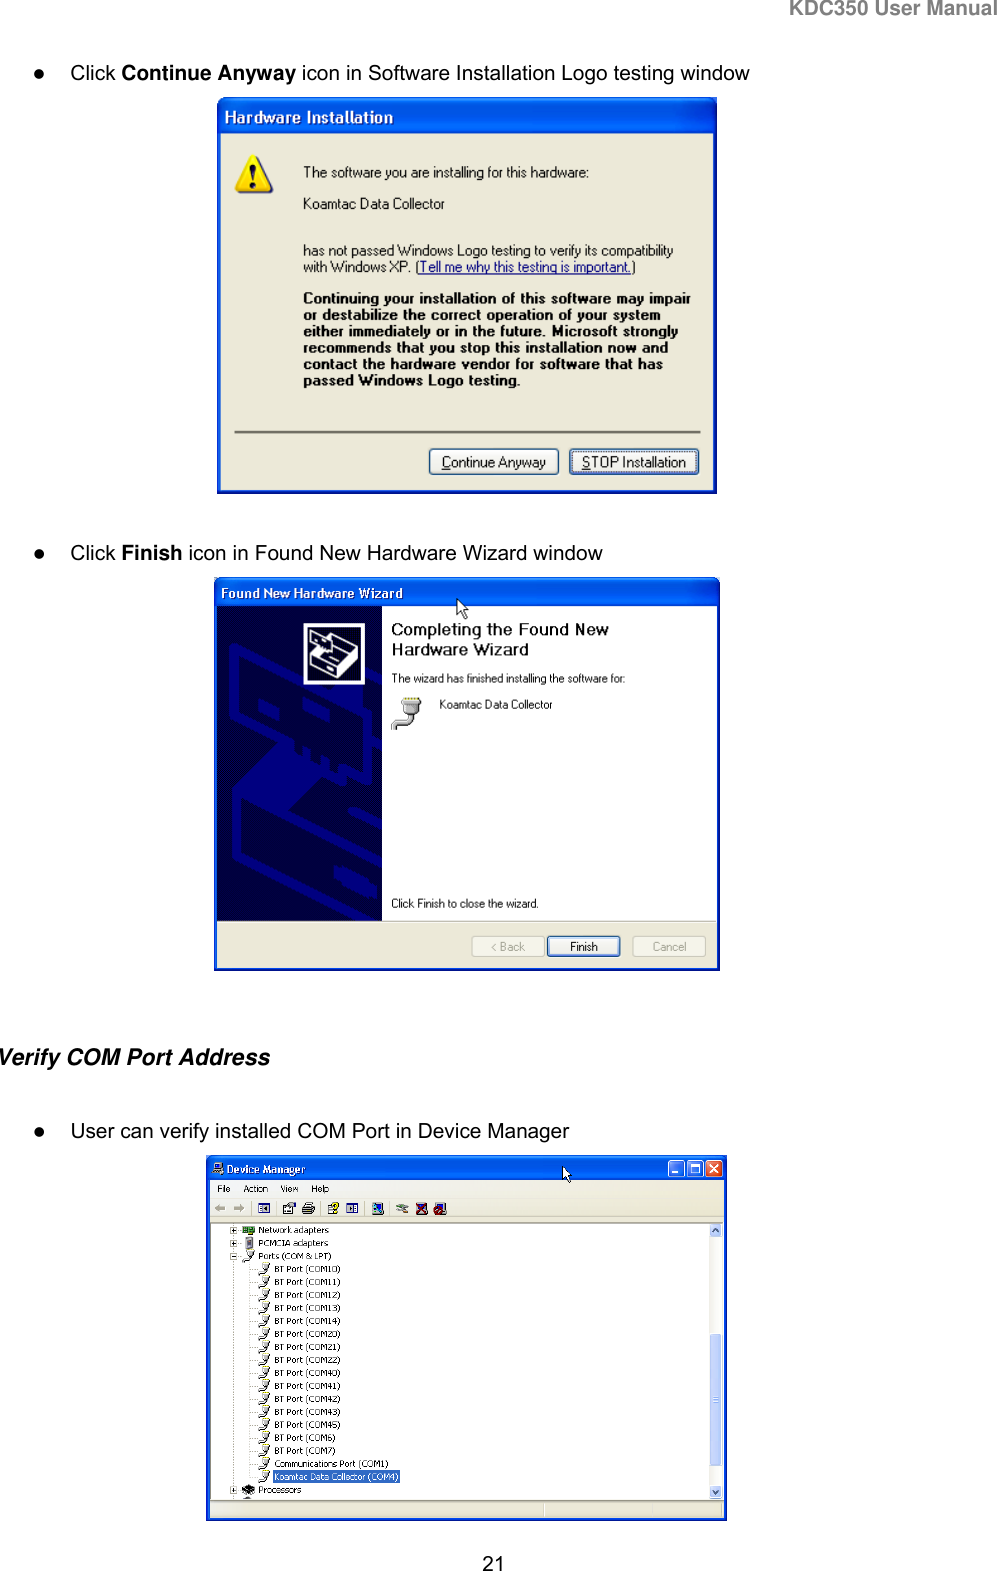 KDC350 User Manual  21   Click Continue Anyway icon in Software Installation Logo testing window    Click Finish icon in Found New Hardware Wizard window   Verify COM Port Address   User can verify installed COM Port in Device Manager  